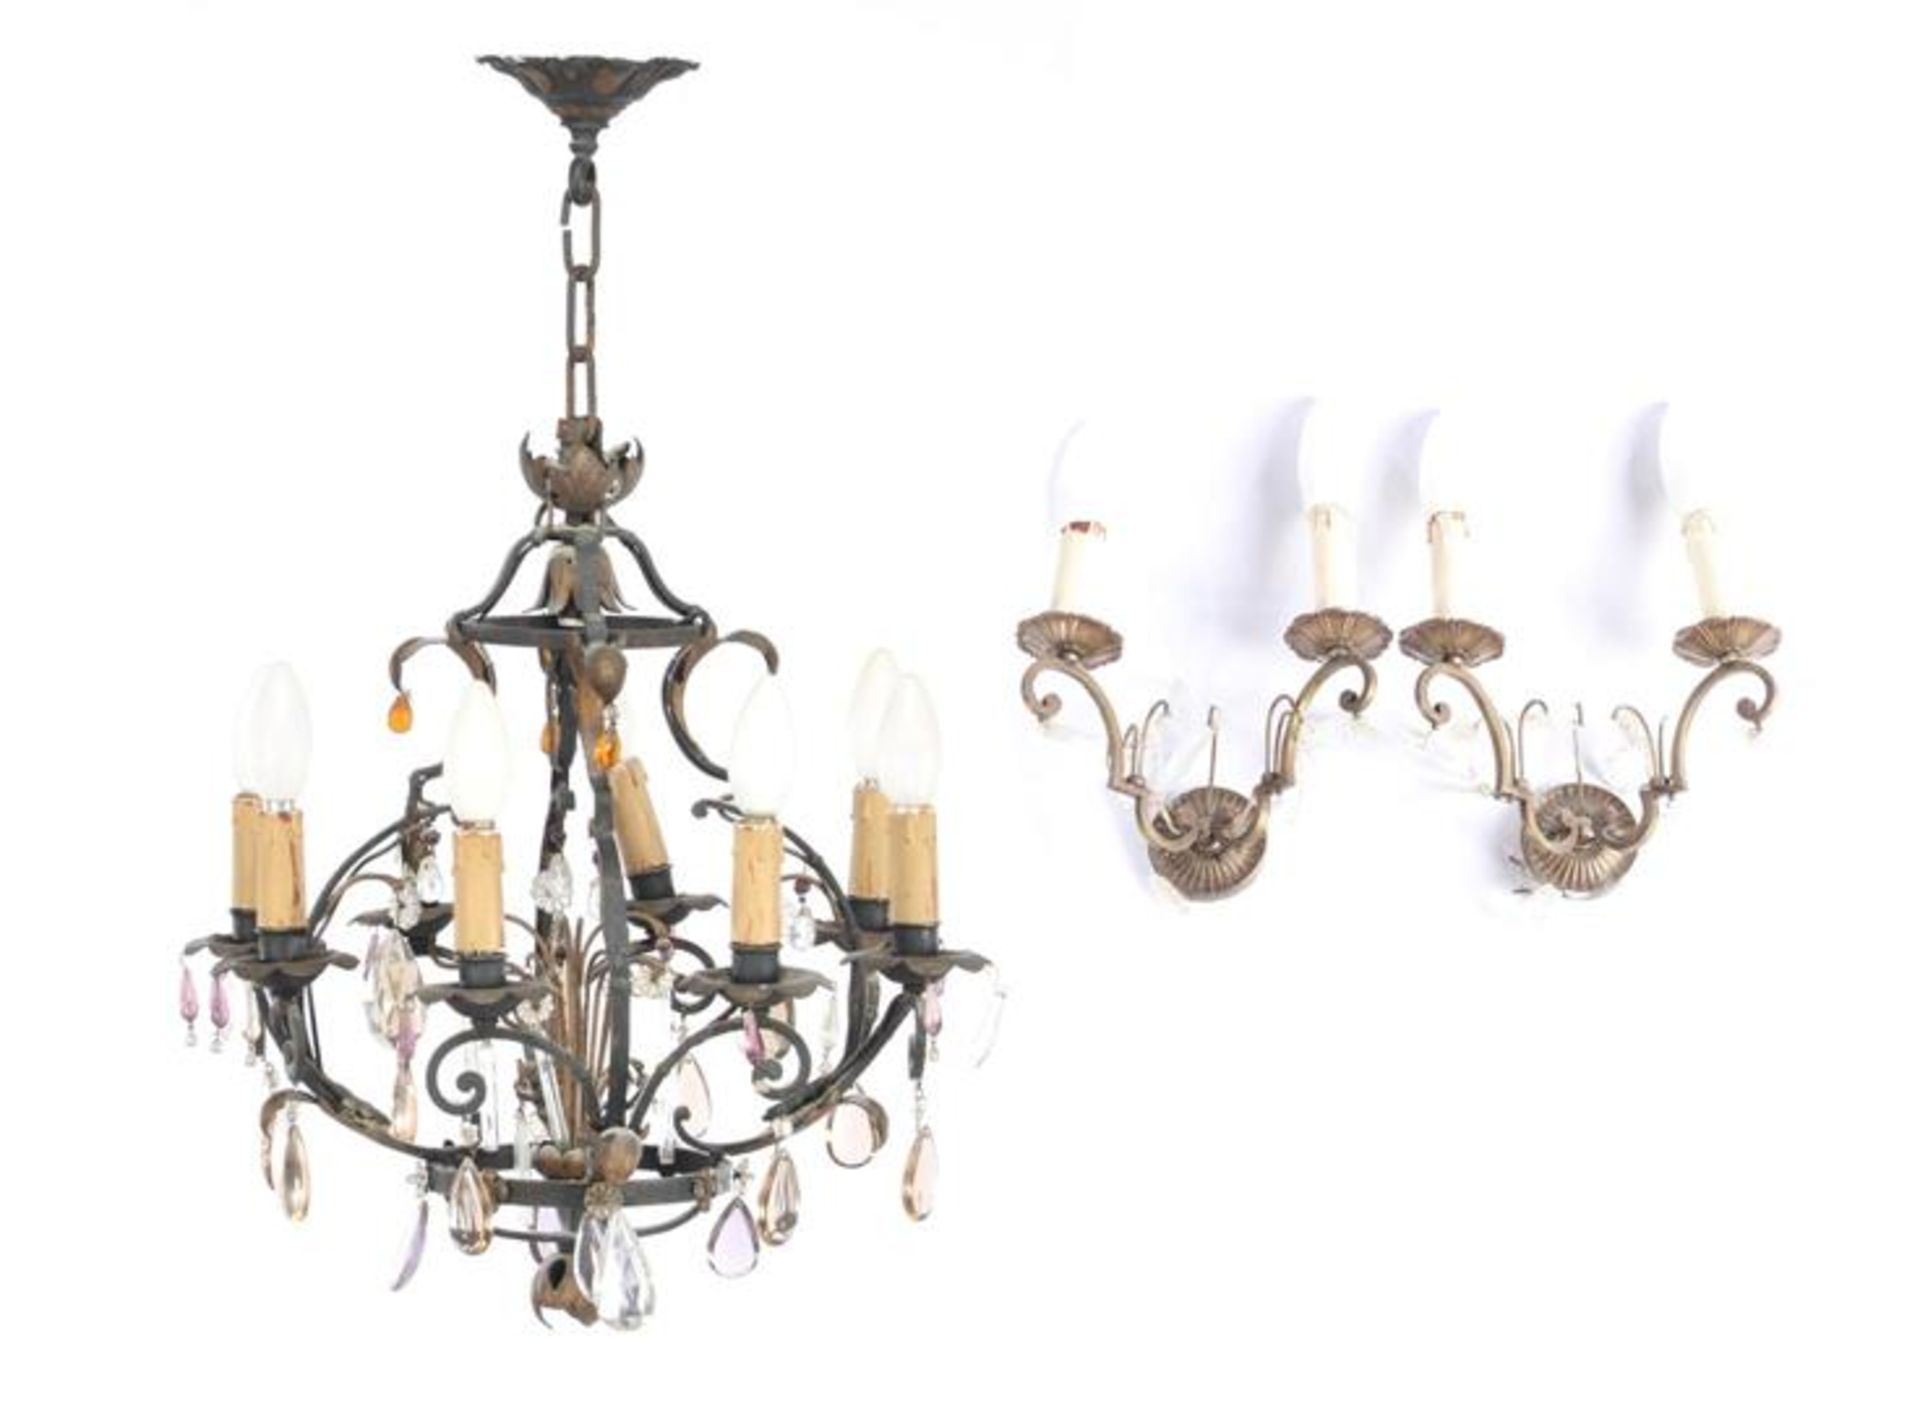 Wrought iron with copper 9-light pendant lamp 66 cm high, 44 cm diameter with 2 & nbsp; 2-light wall